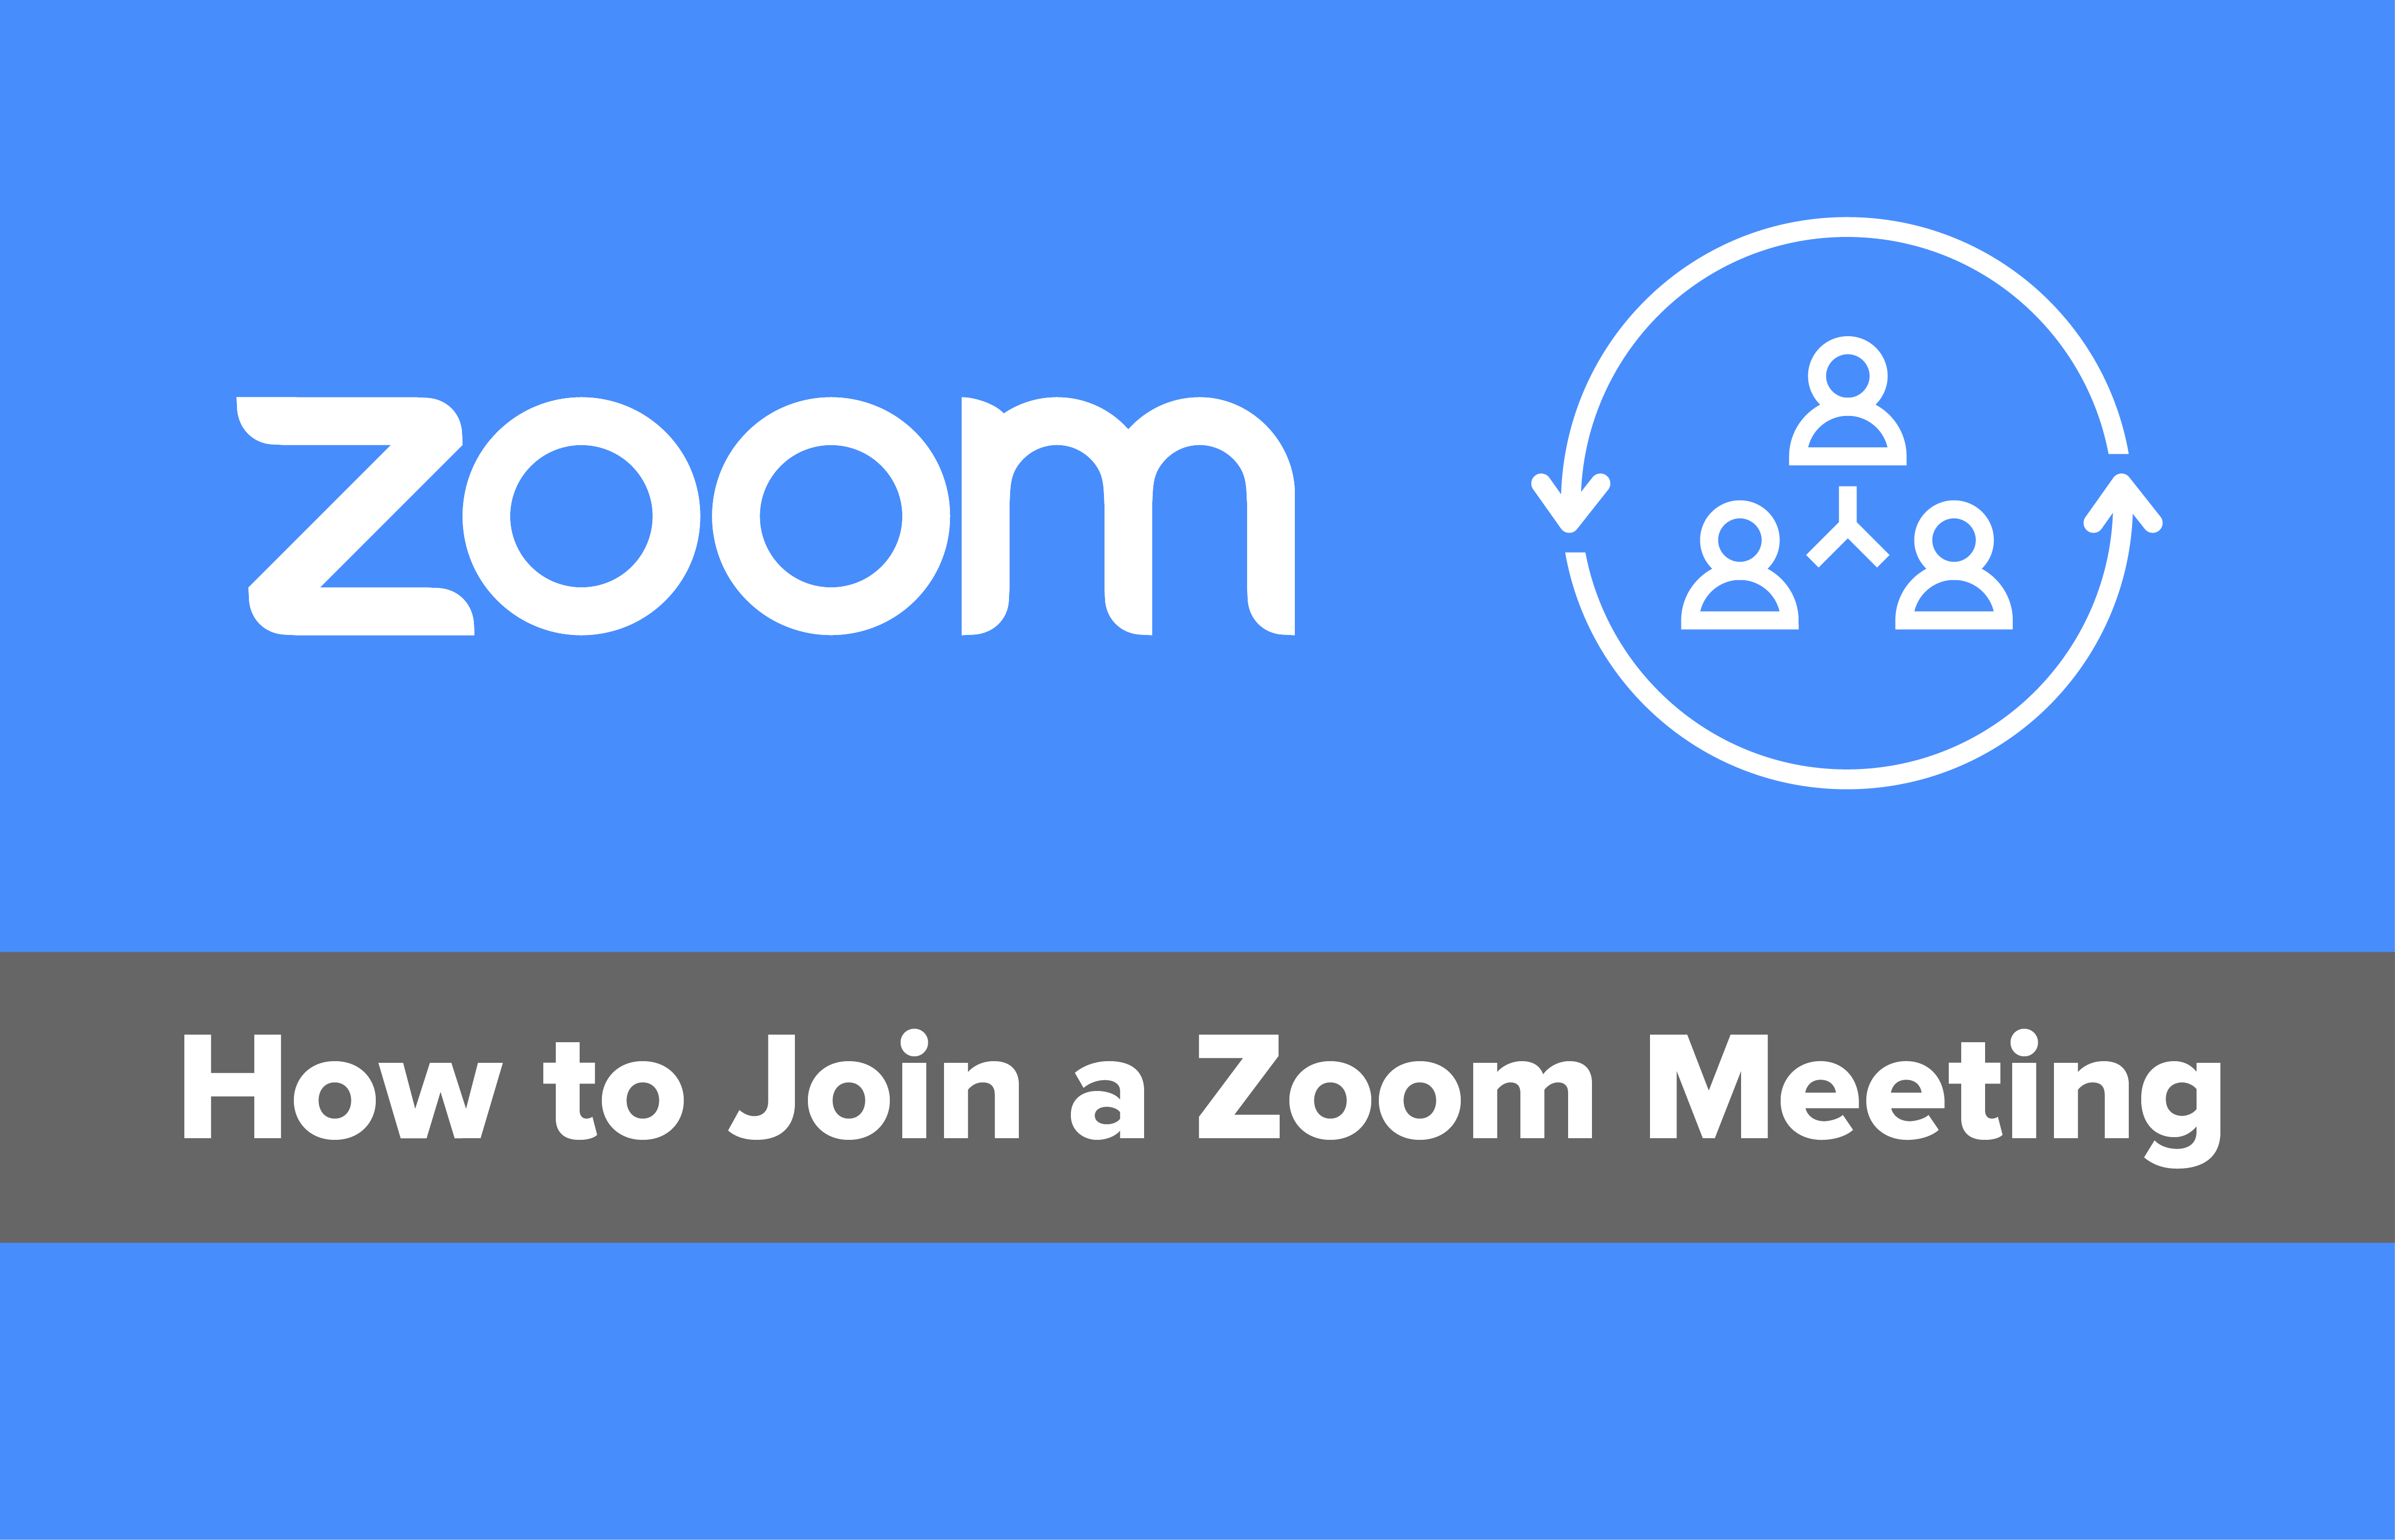 A-Zoom Logo - How To Easily Join A Zoom Meeting - AVSPECT